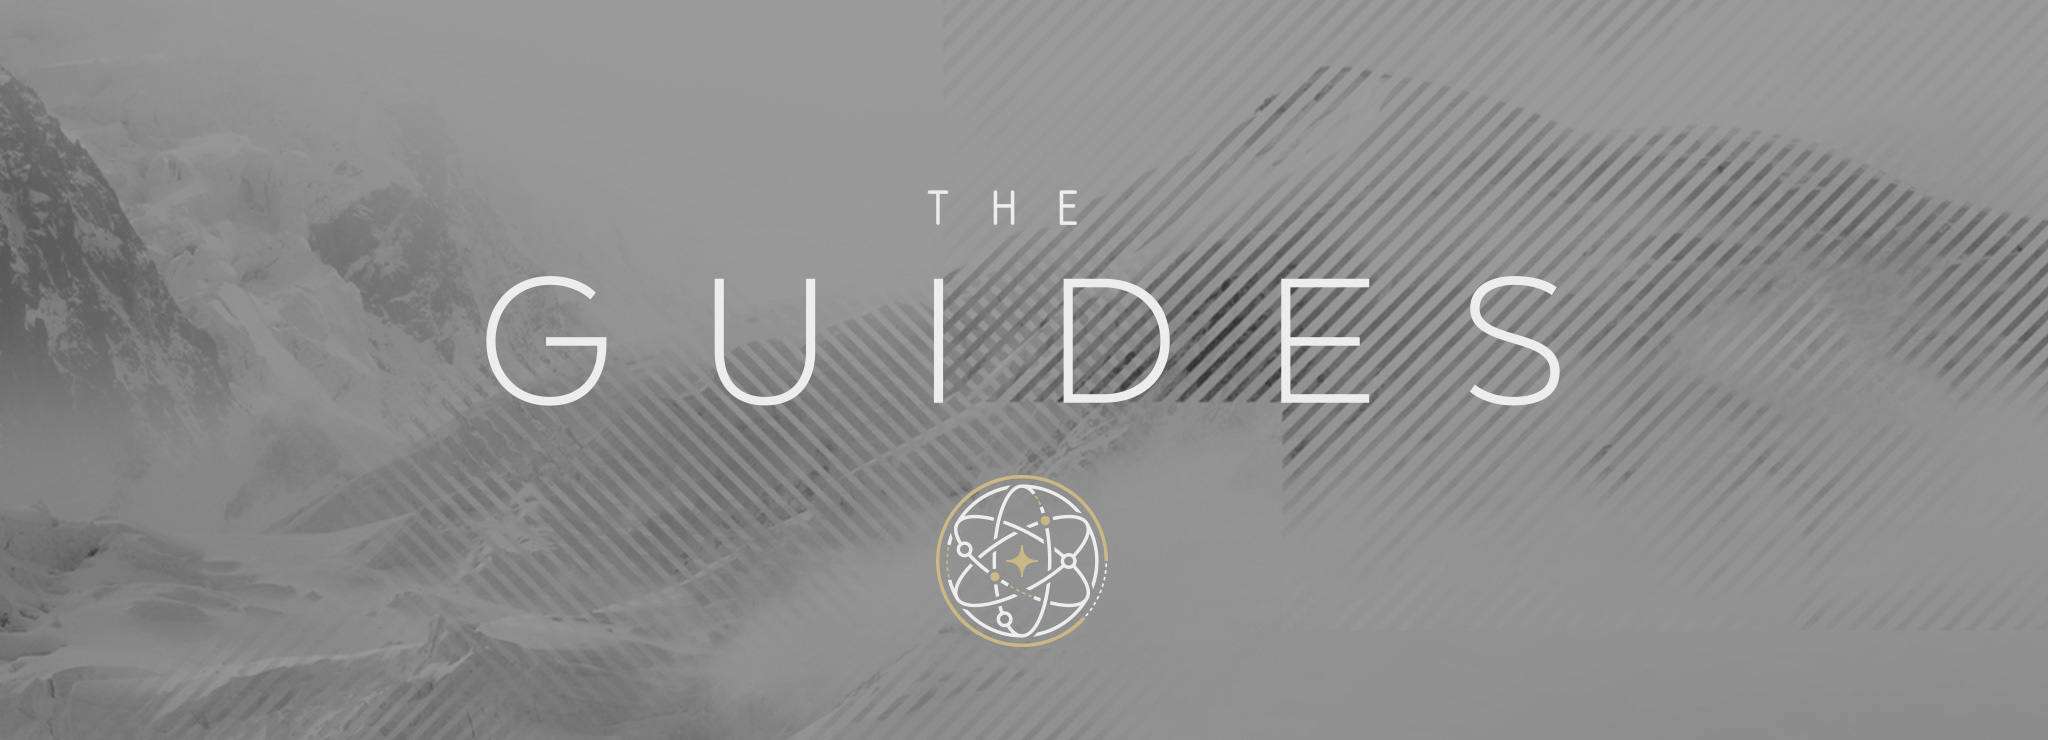 The Guides Promo